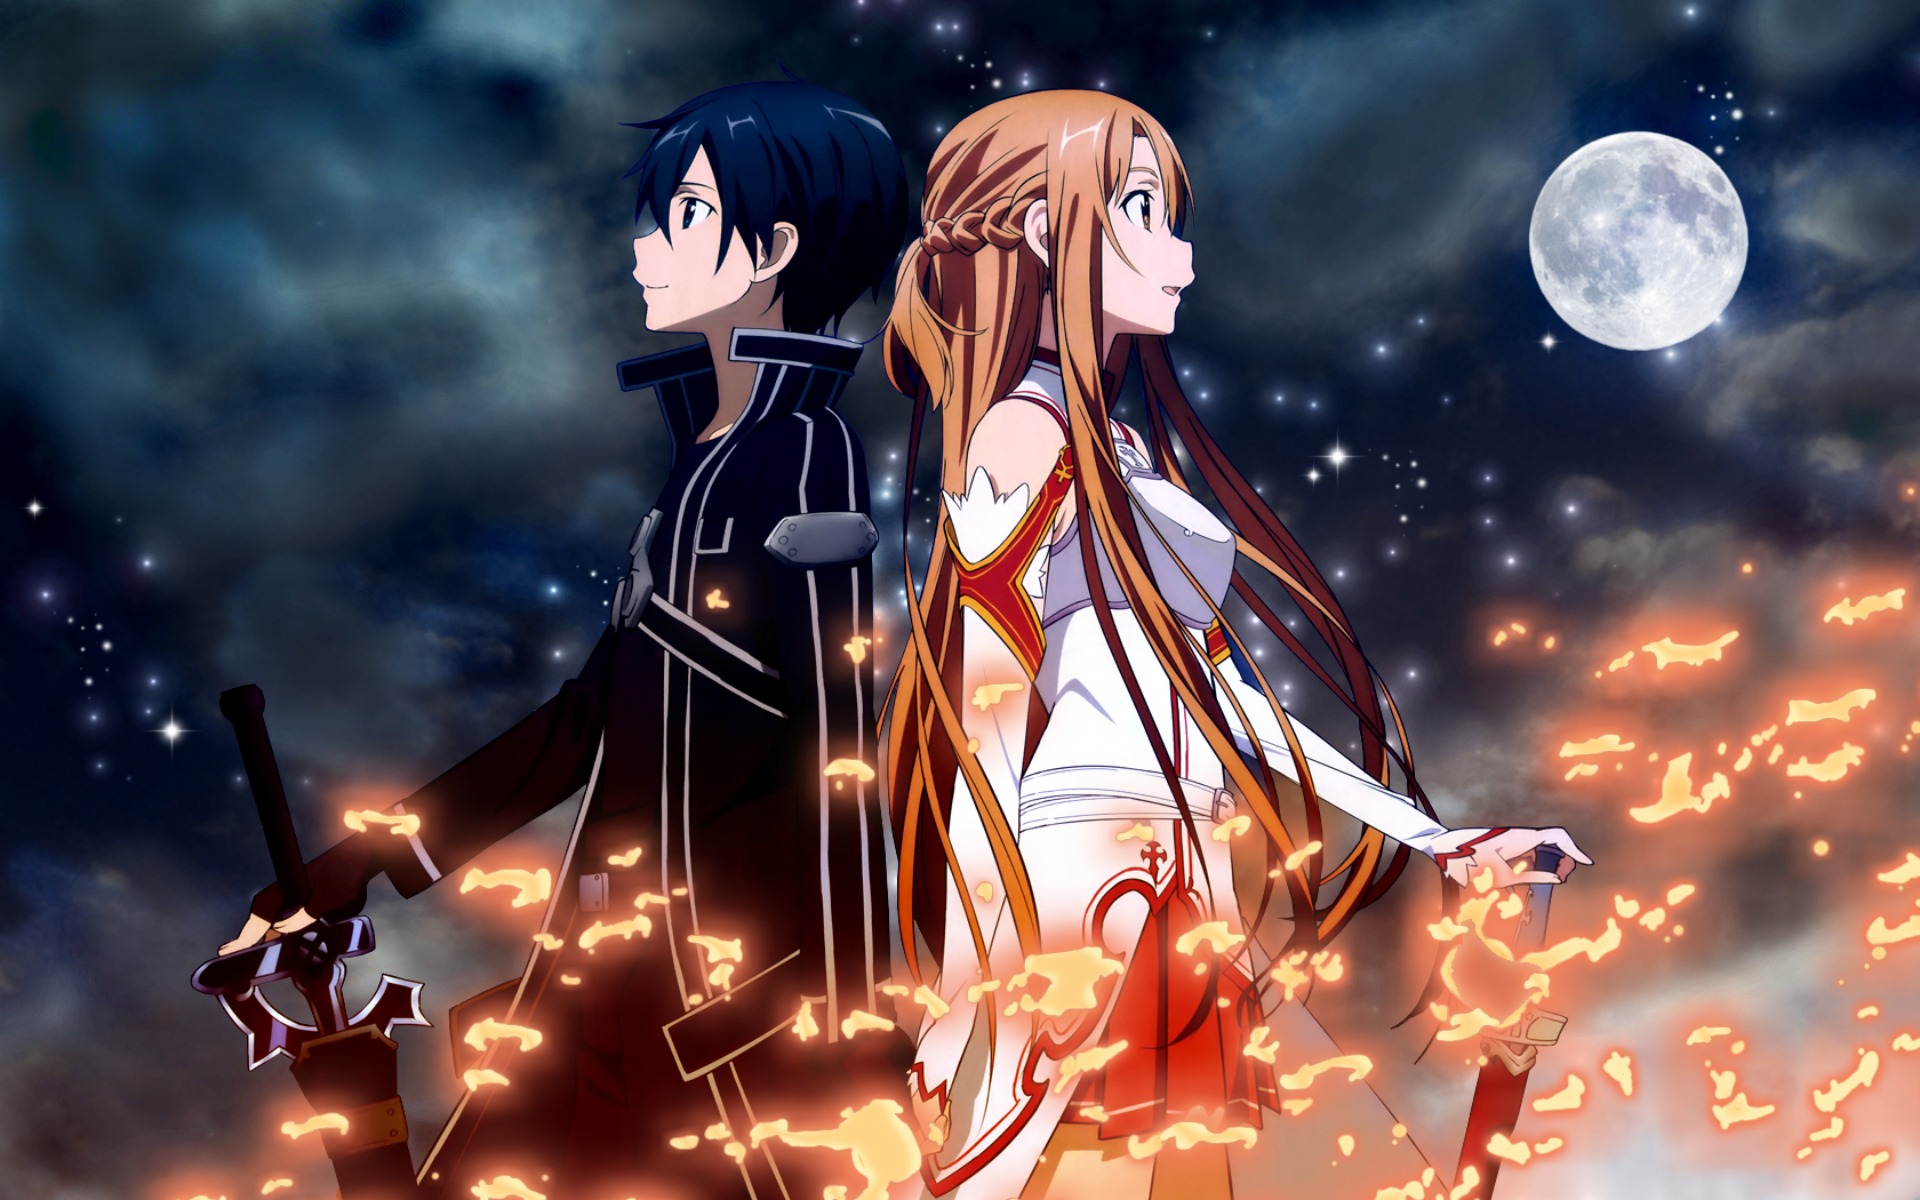 Sword Art Online images SAO HD wallpaper and background photos 1920x1200